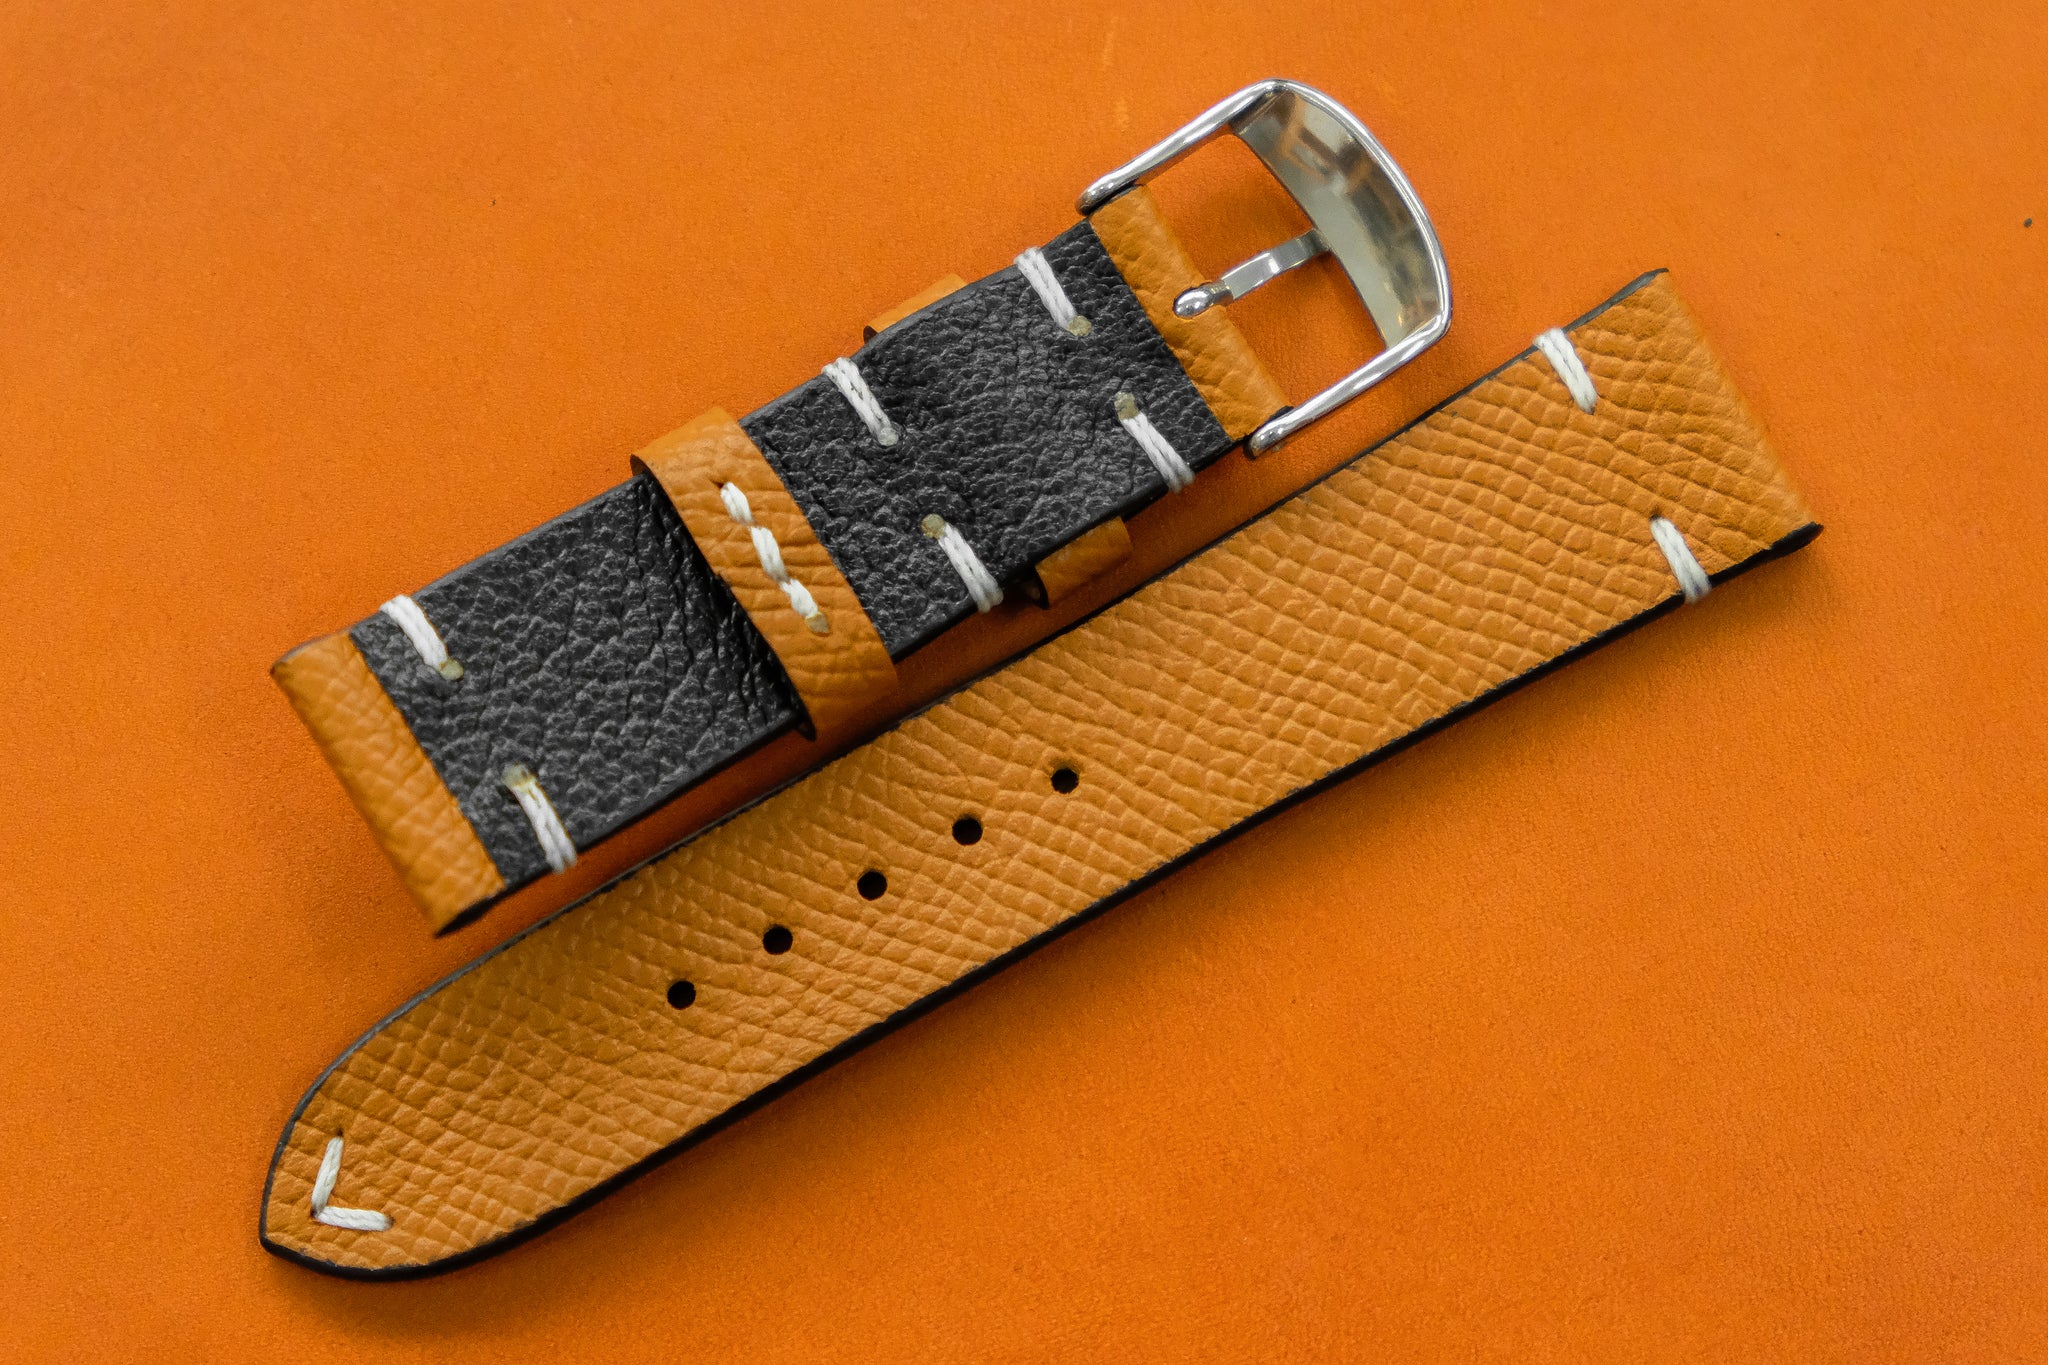 Gold Brown Epsom Leather Watch Strap, Quick Release